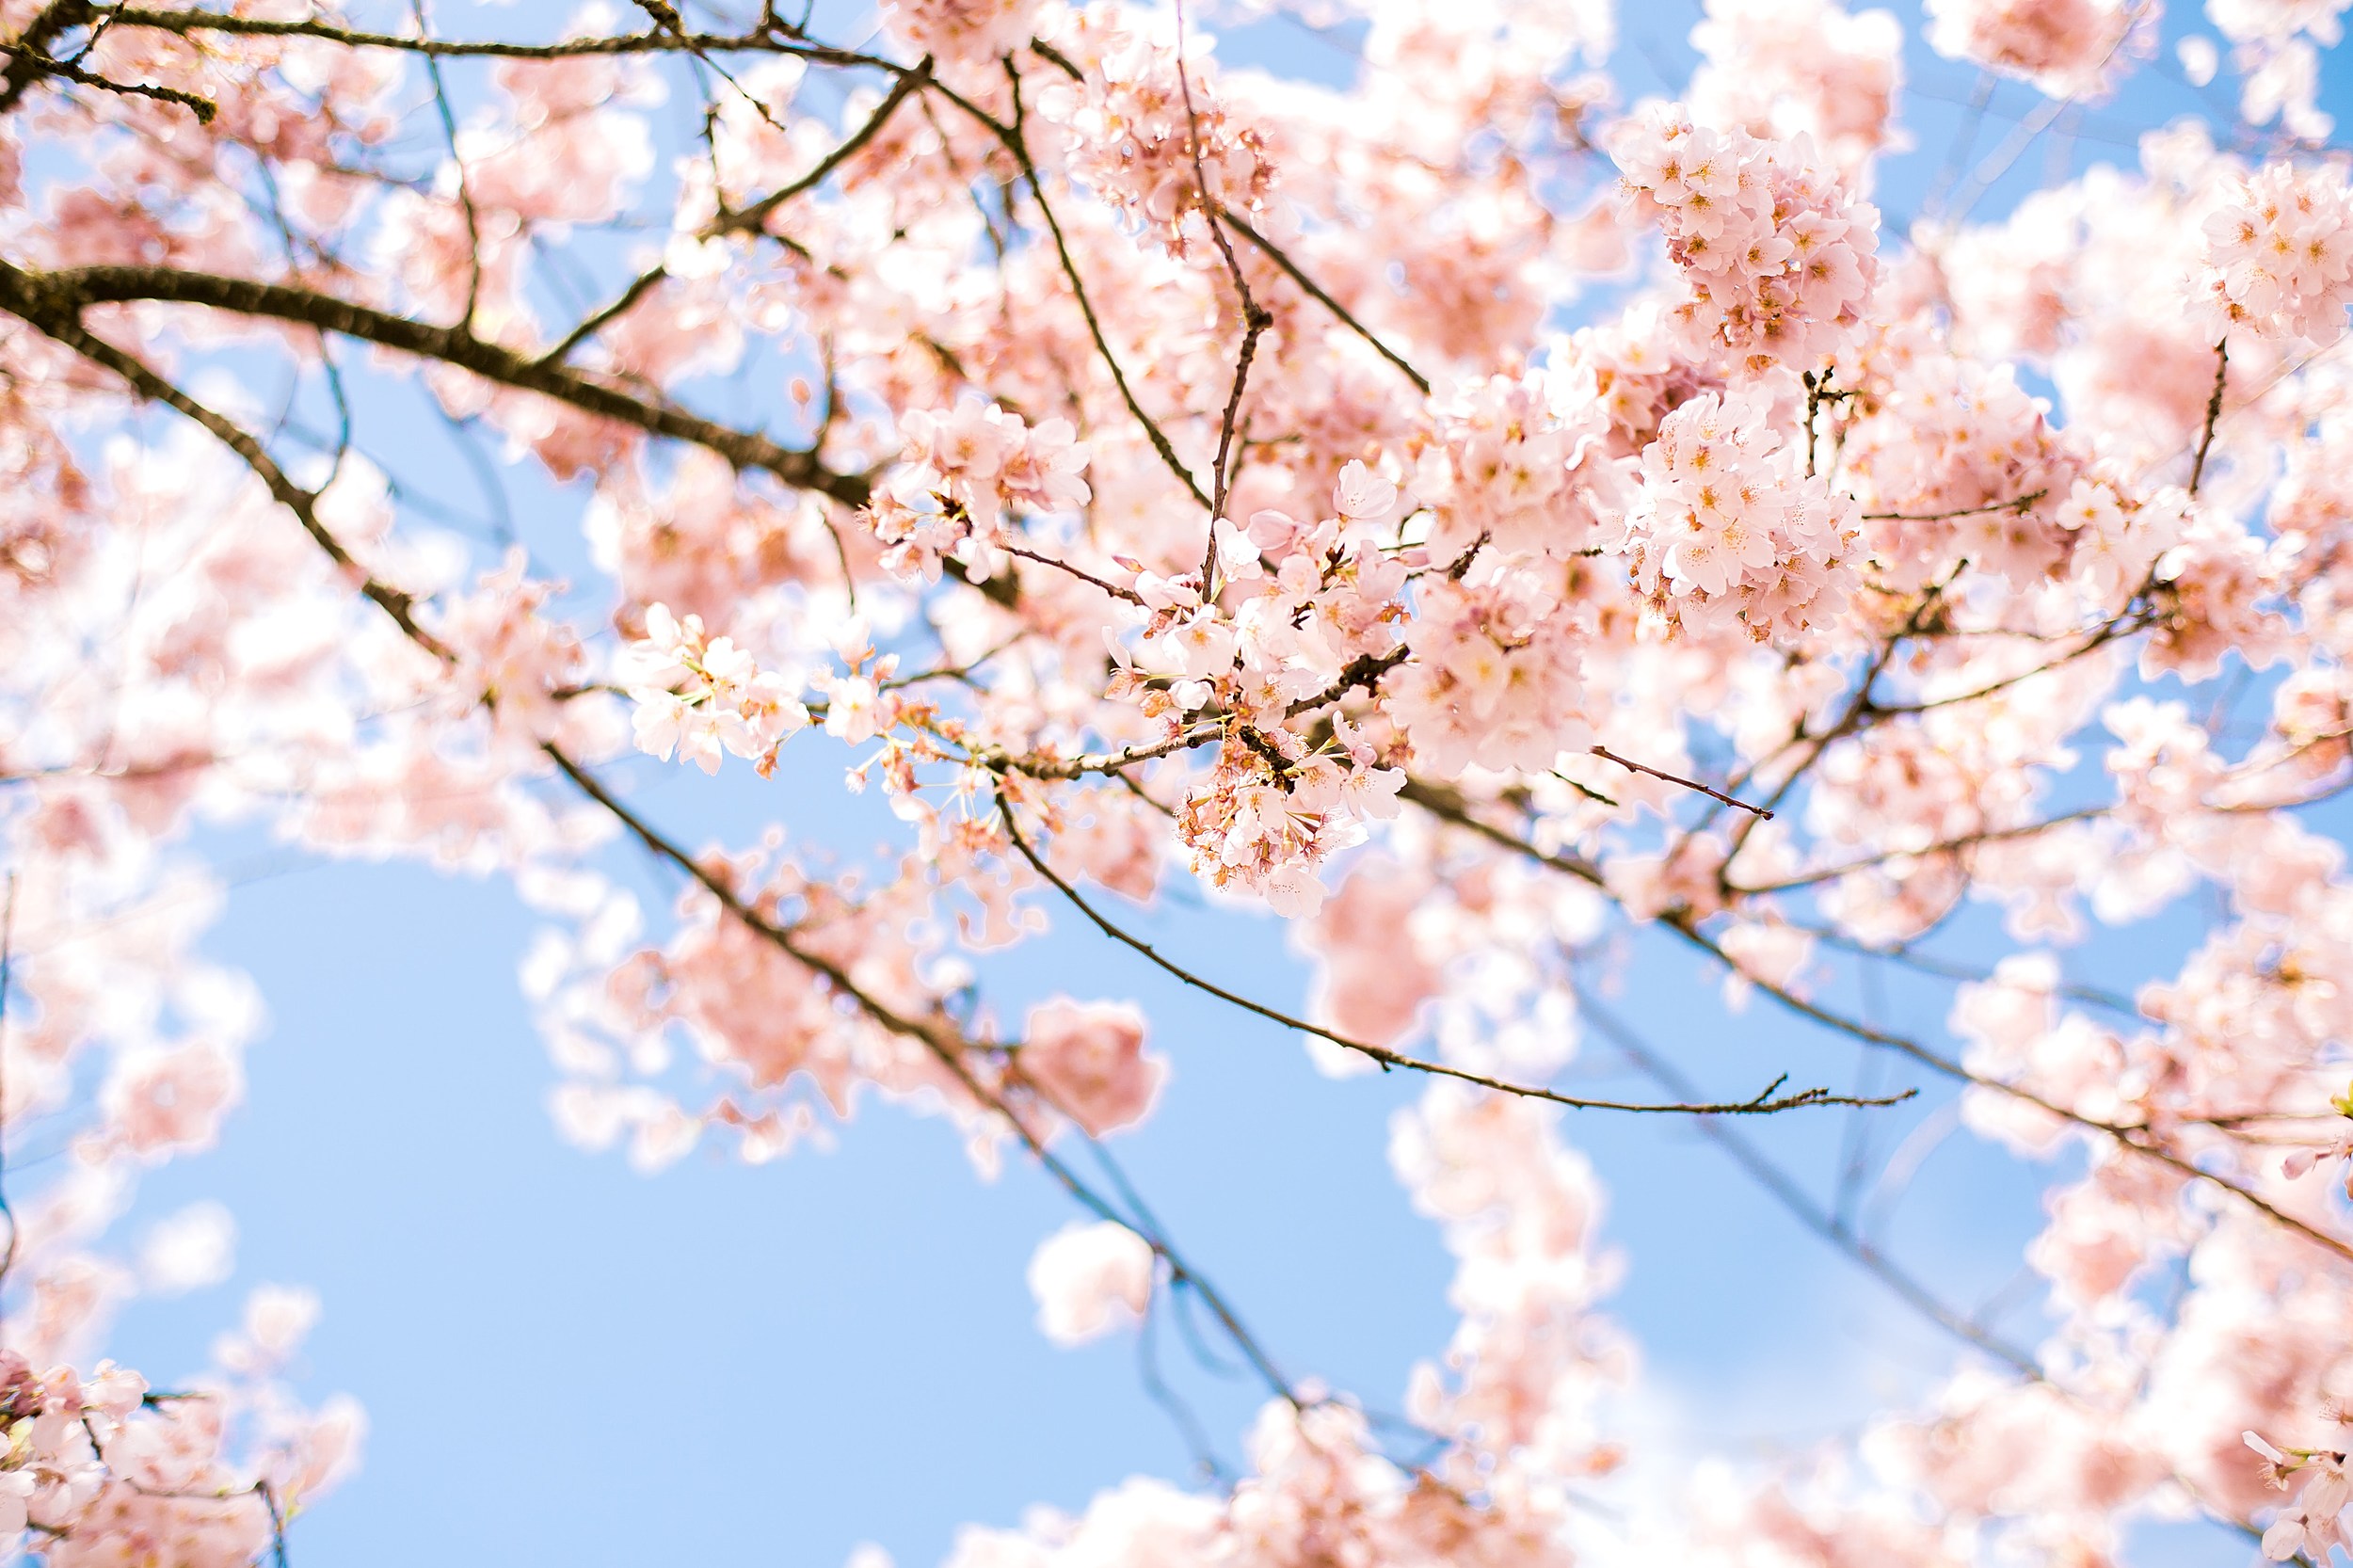 New Jersey's cherry blossoms coming early this year